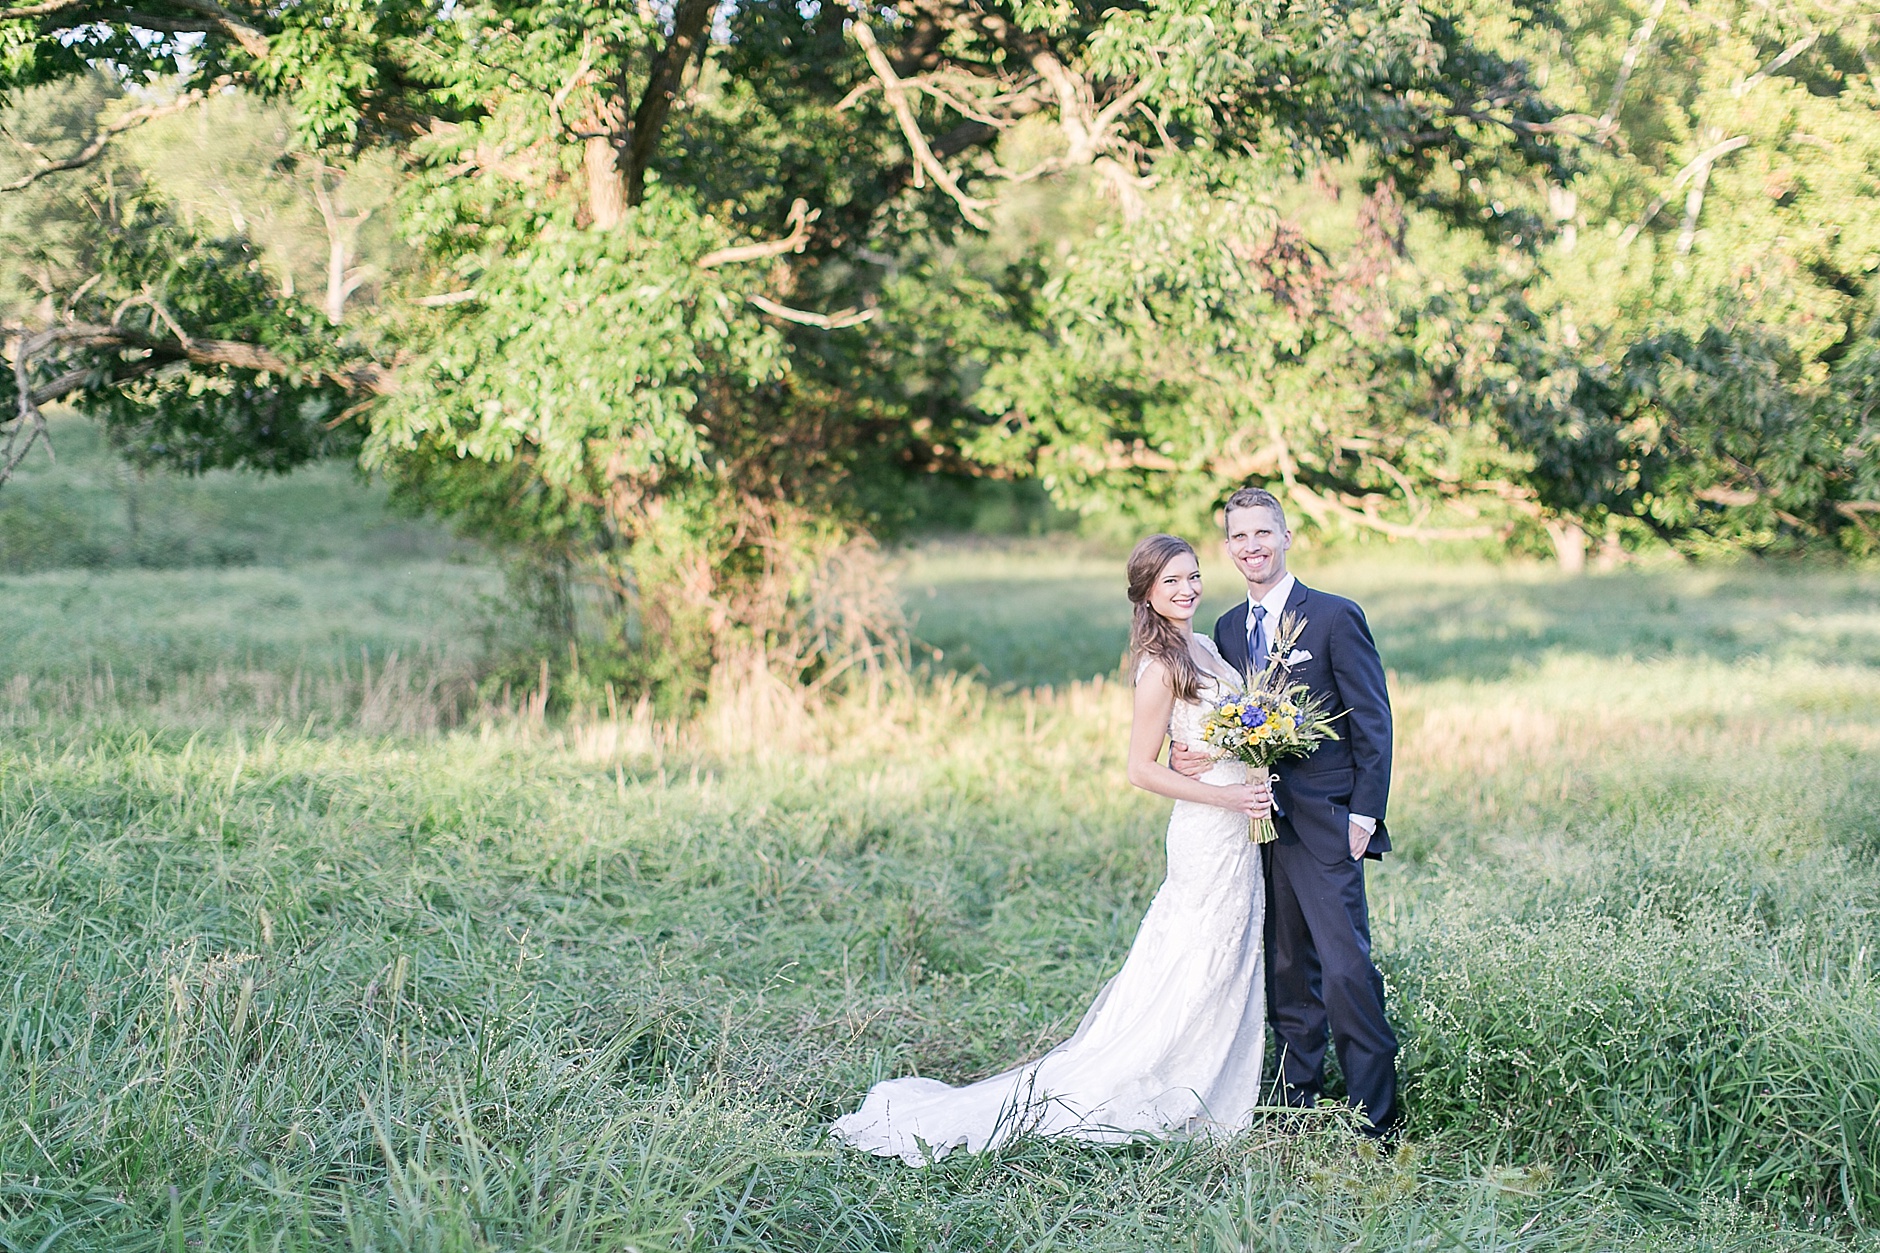 A Haue Valley Summer Wedding in St. Louis, Missouri by Rachael Houser Photography